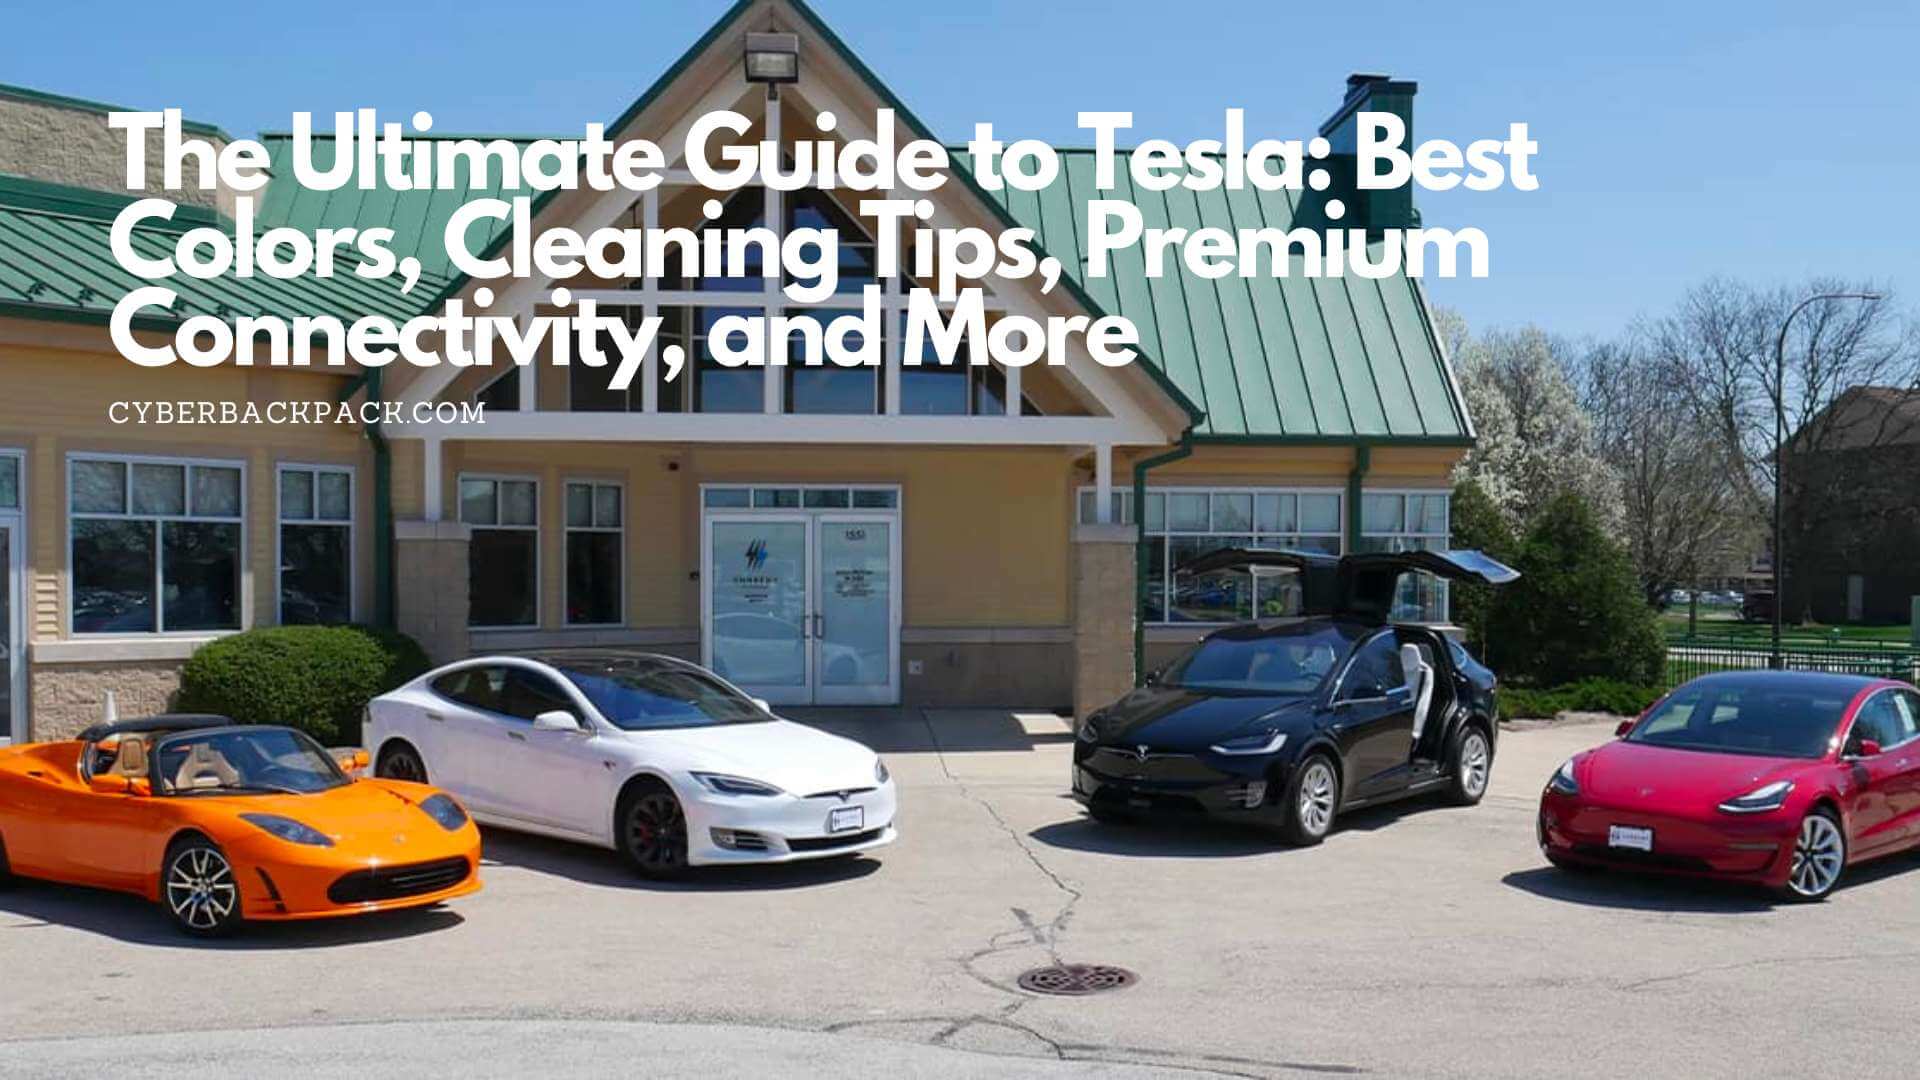 The Ultimate Guide to Tesla: Best Colors, Cleaning Tips, Premium Connectivity, and More